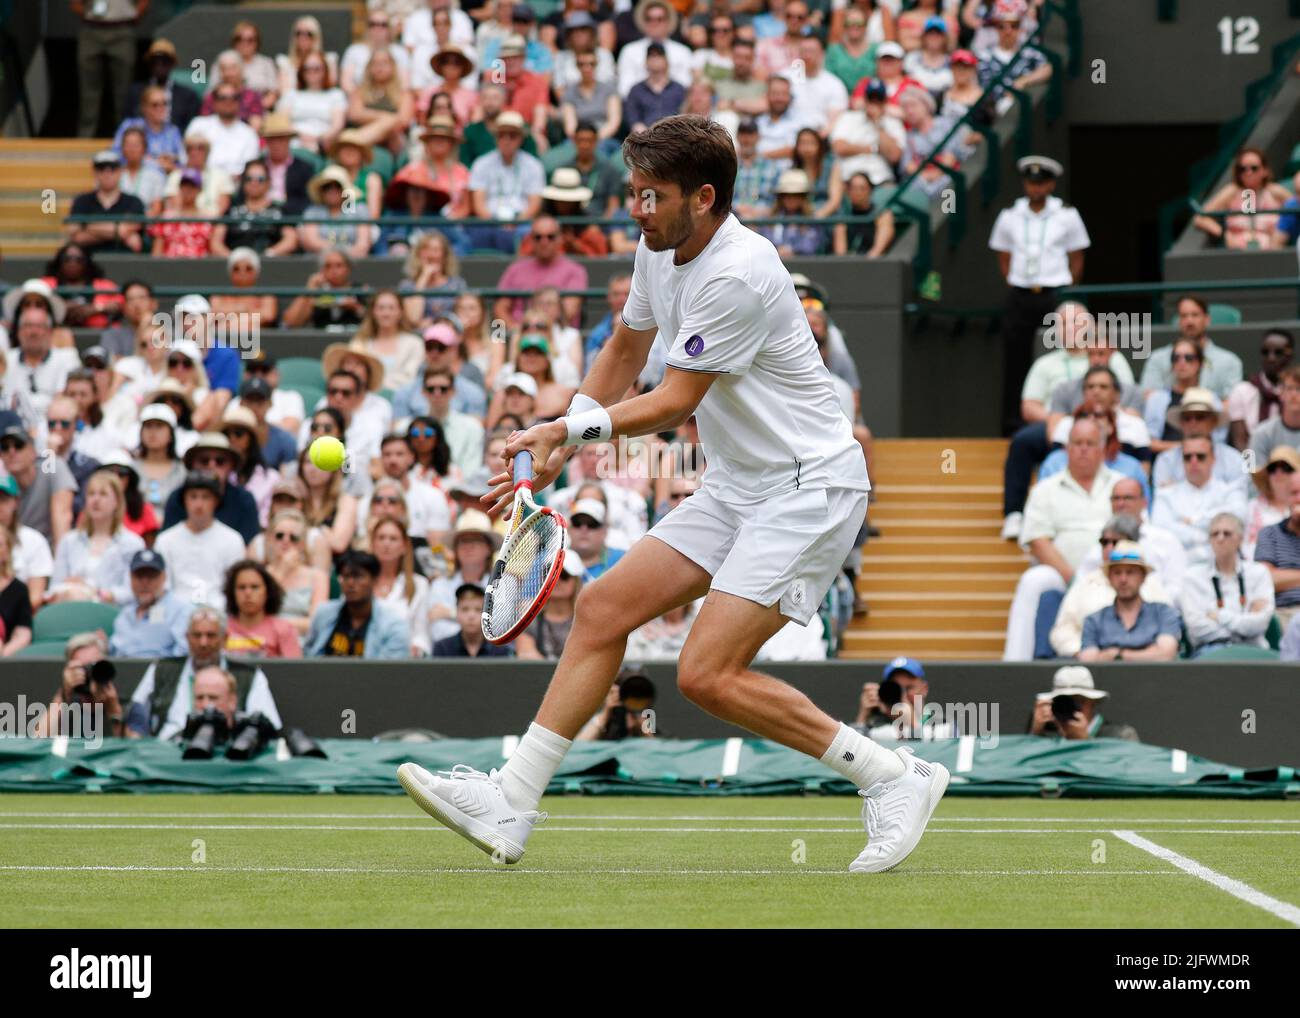 5th July 2022, All England Lawn Tennis and Croquet Club, London, England; Wimbledon Tennis tournament; Cameron Norrie (GBR) plays a forehand to David Goffin (BEL) Credit Action Plus Sports Images/Alamy Live News